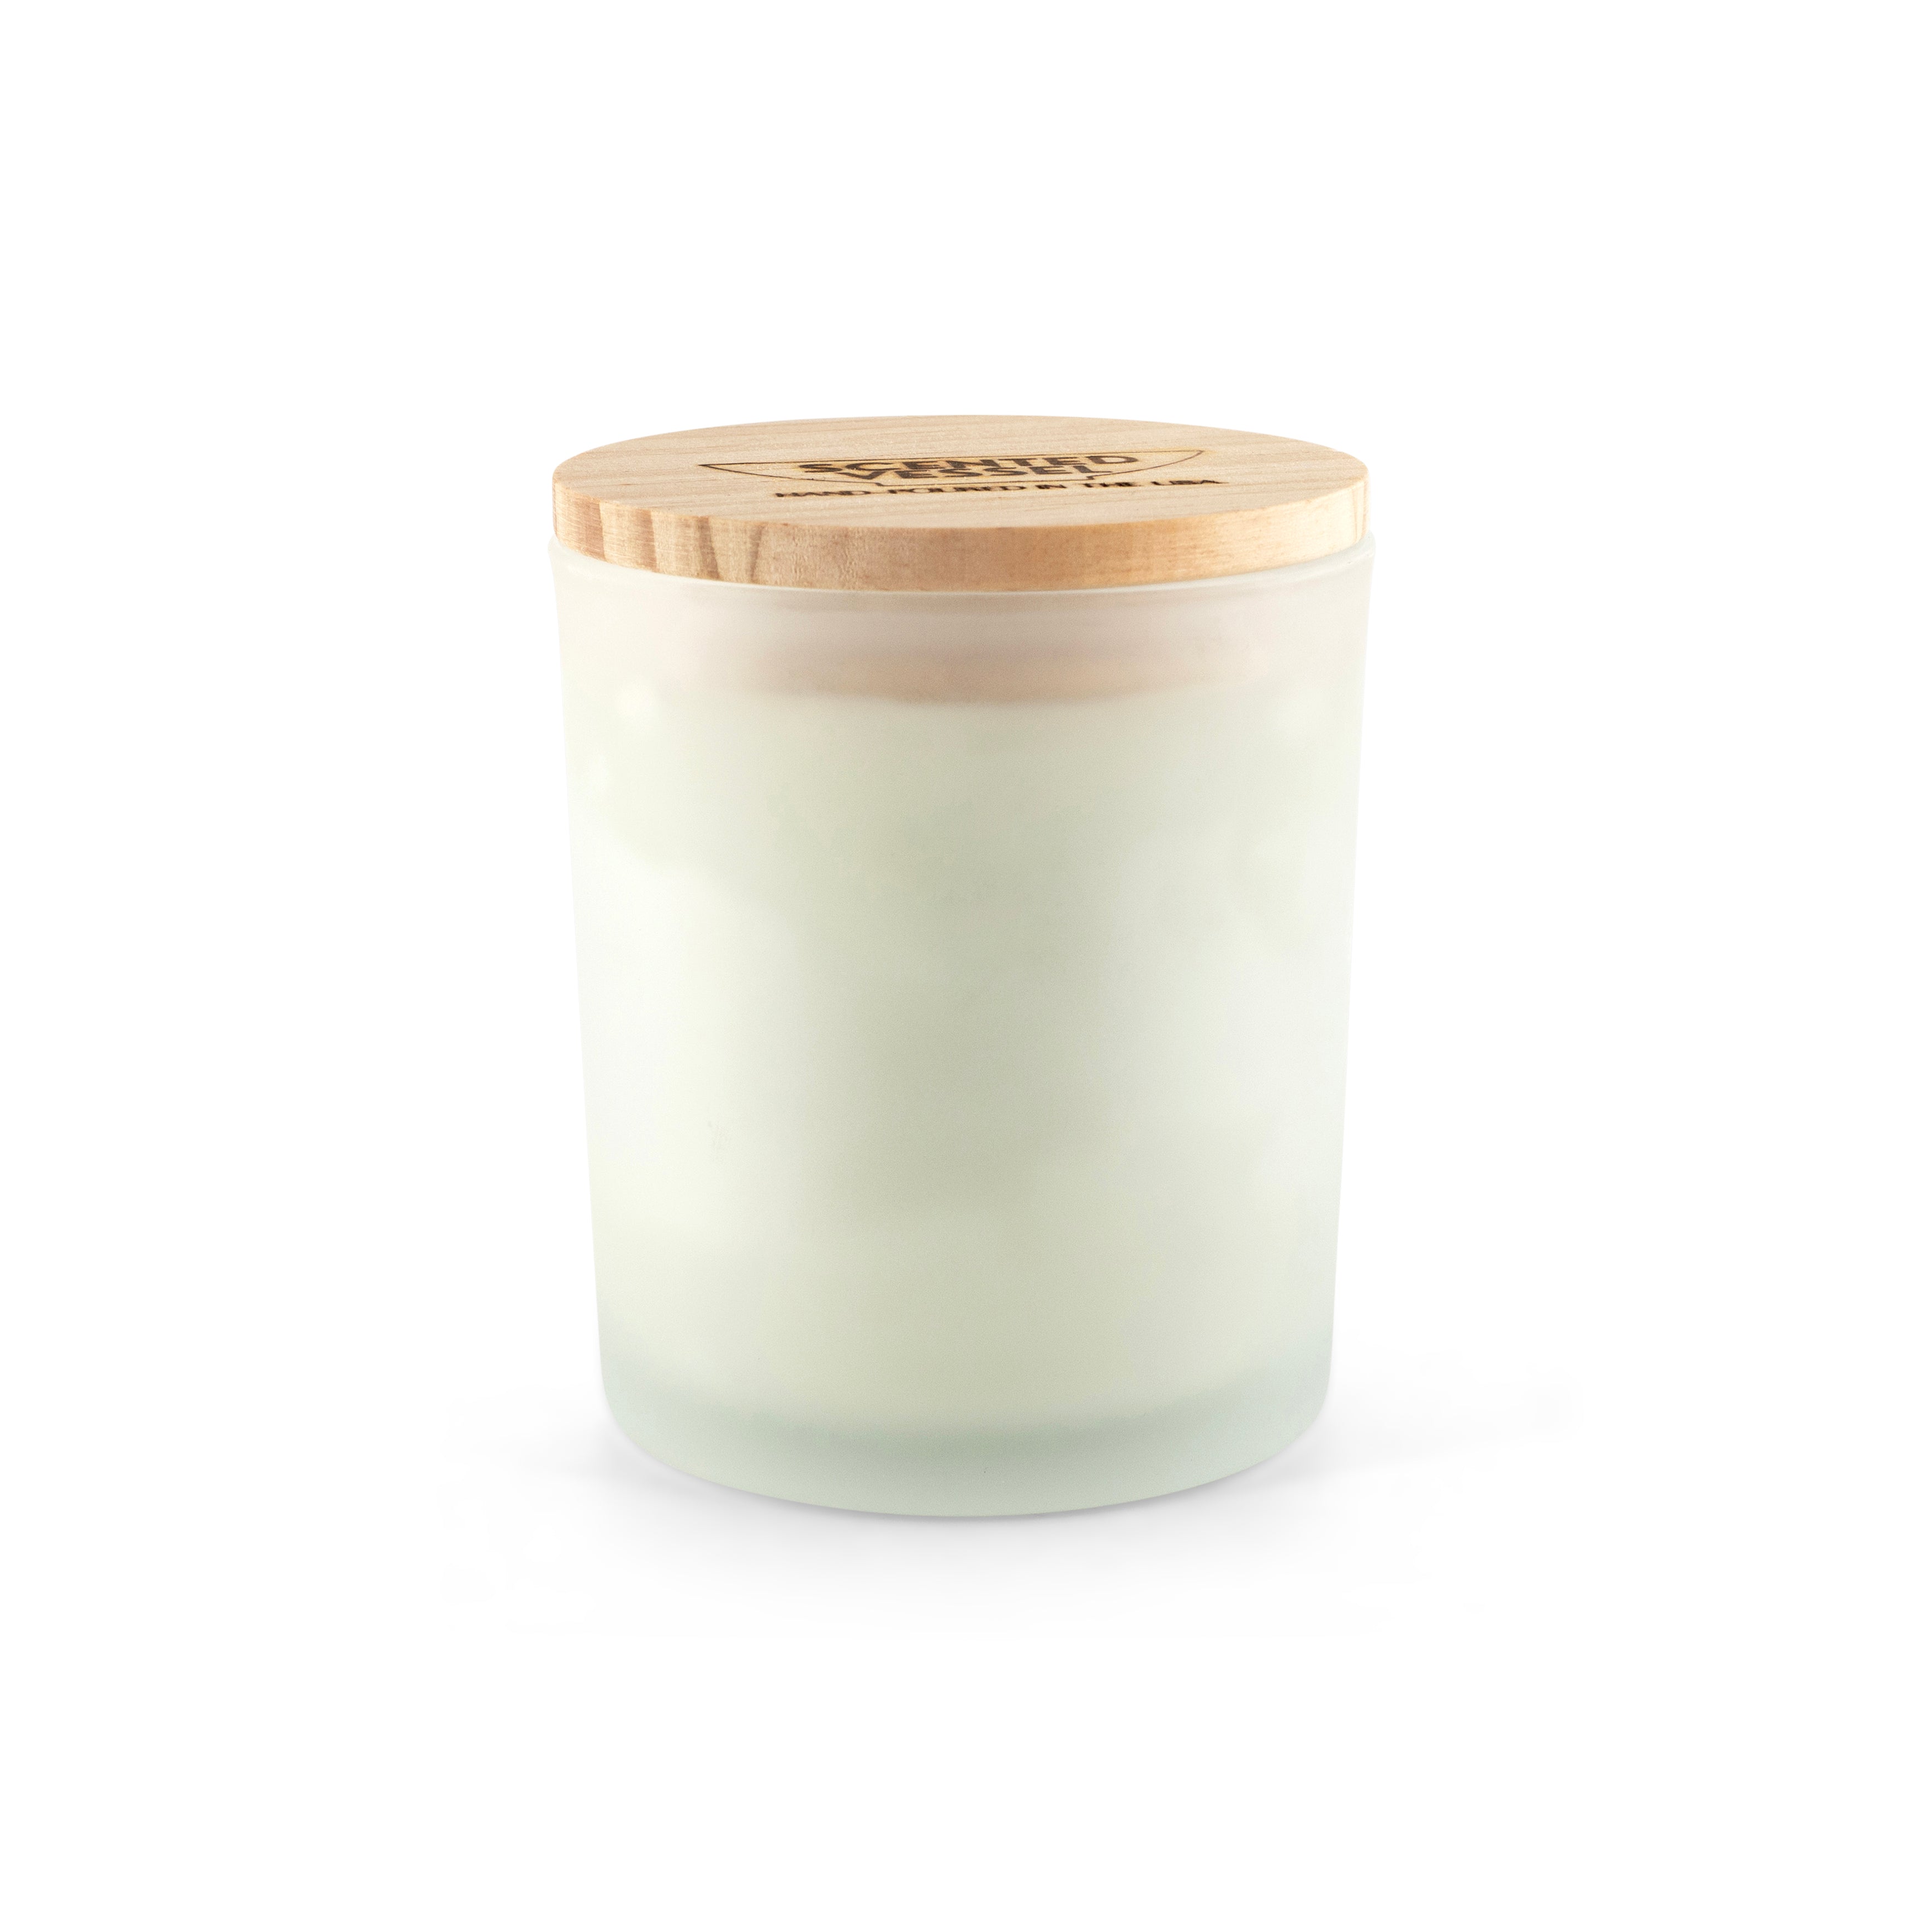 Blooming Gardenia 7.5oz Soy Wax Blend Candle by Scented Vessel